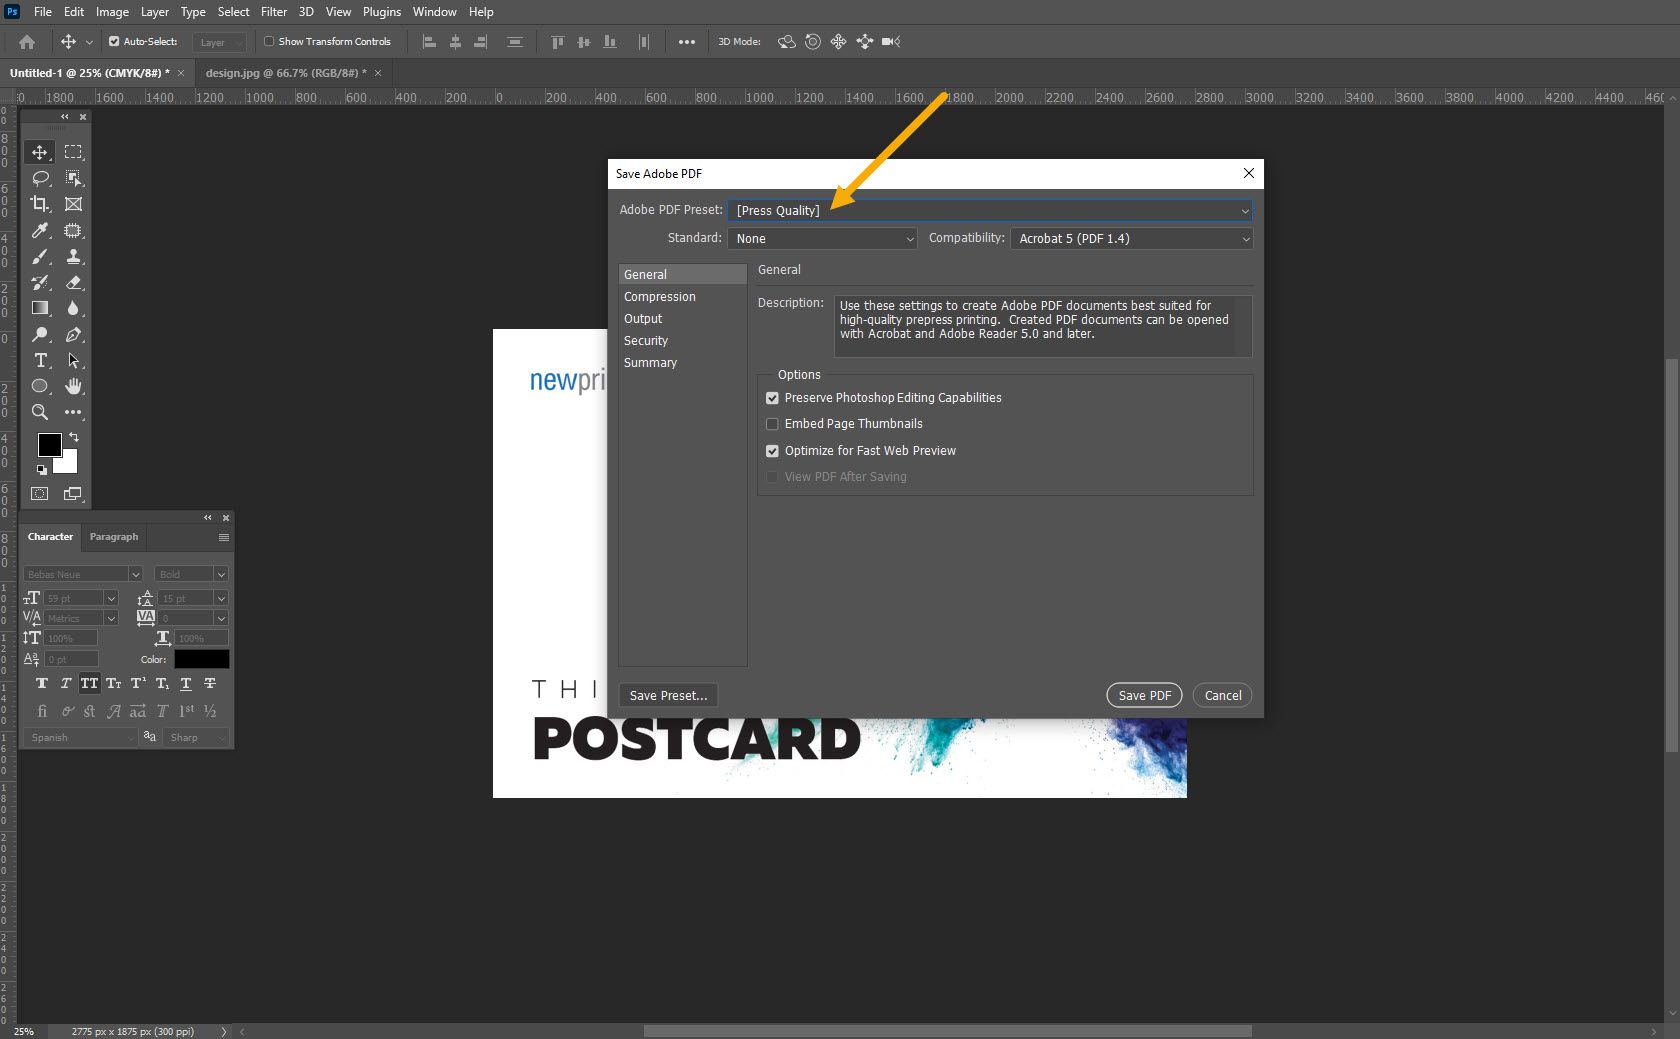 Screenshot of Adobe Photoshop PDF export dialog box showing the correct settings for exporting a print file.